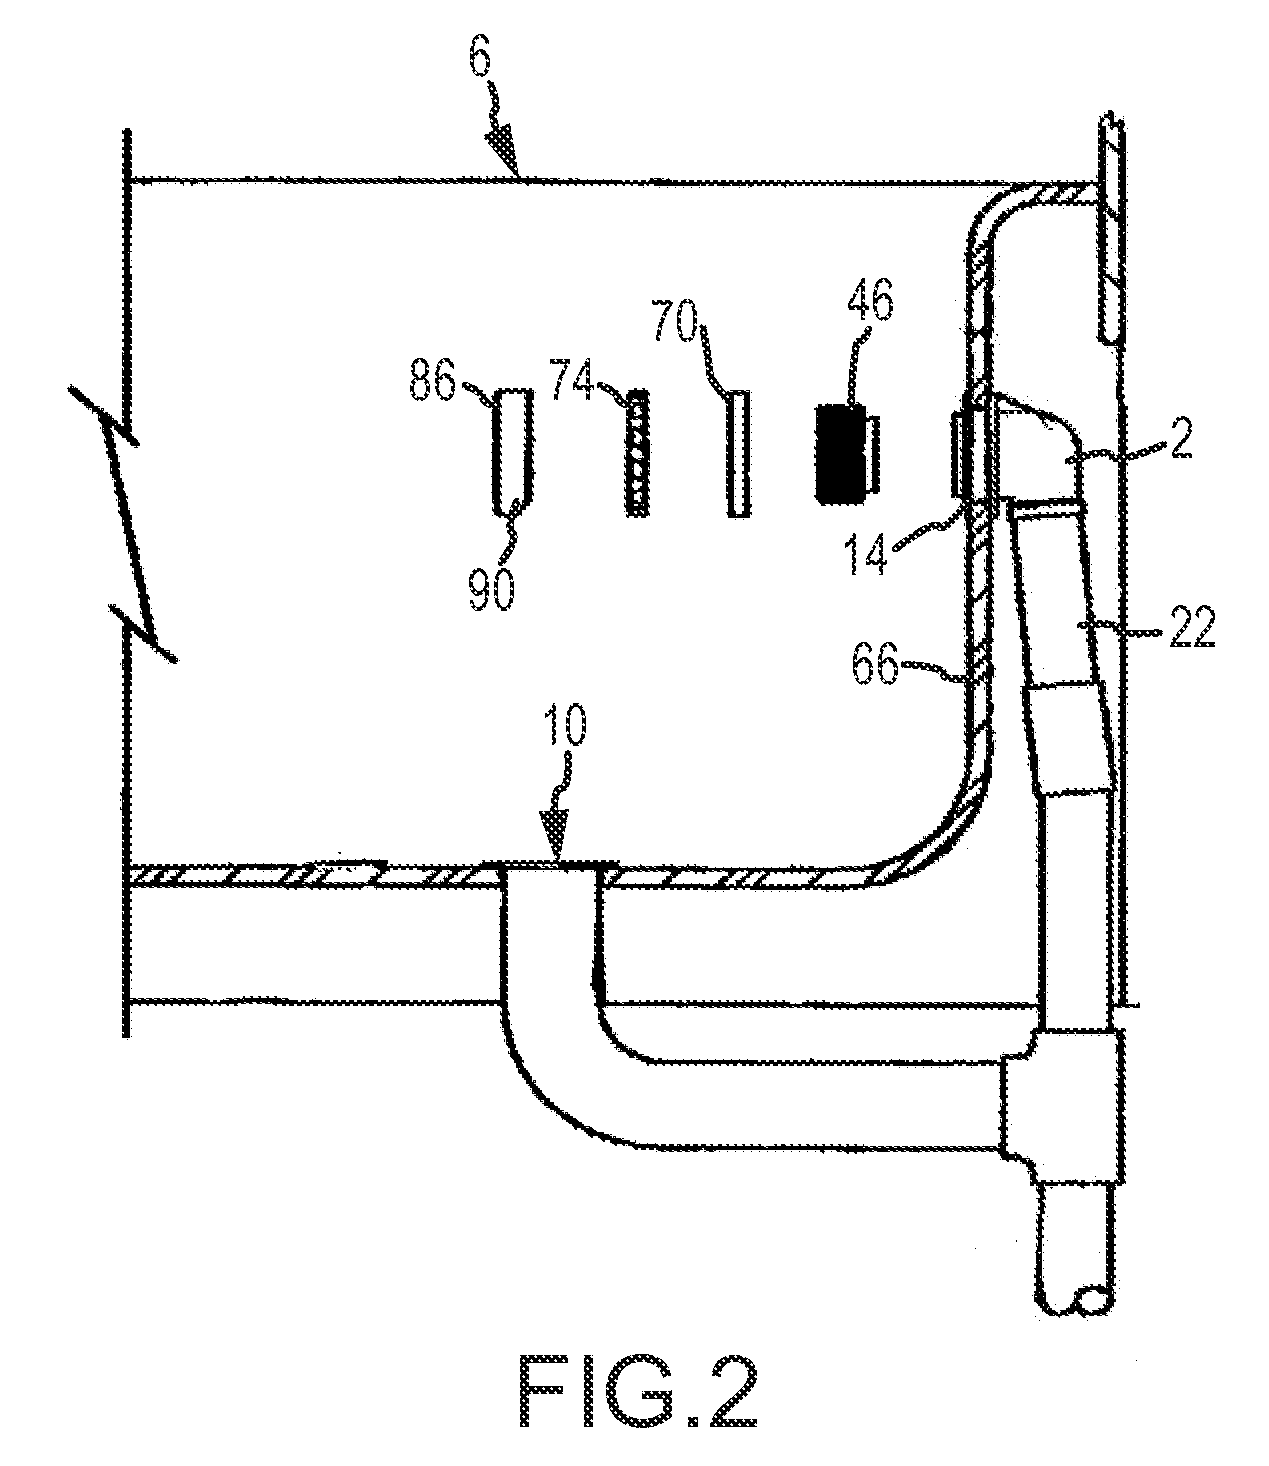 Method and associated apparatus for assembling and testing a plumbing system